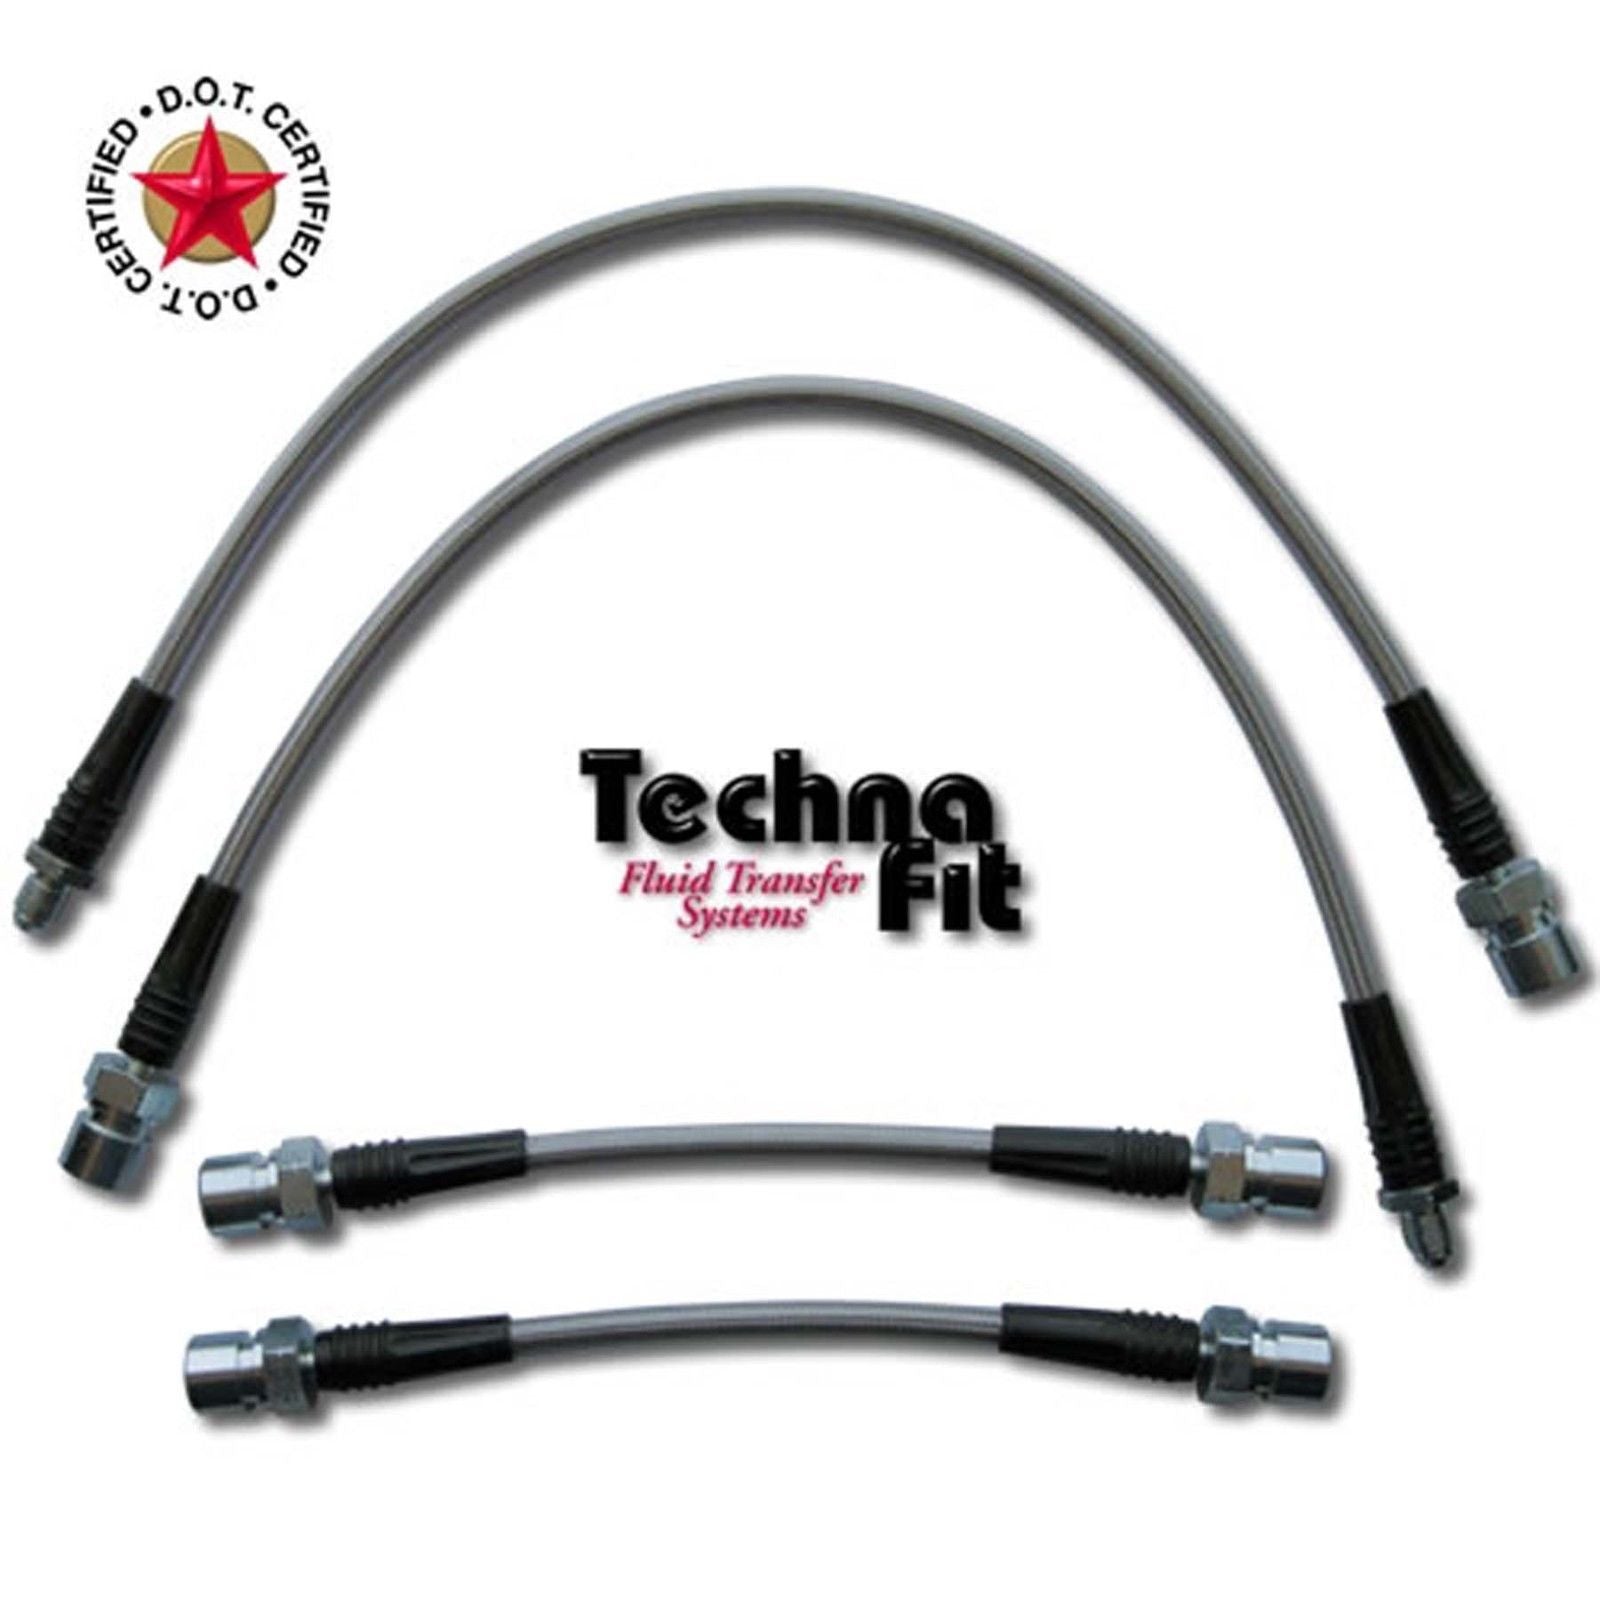 Techna-Fit Stainless Steel Brake Lines - 2009-15 Nissan Maxima - Front & Rear - NIS-1160